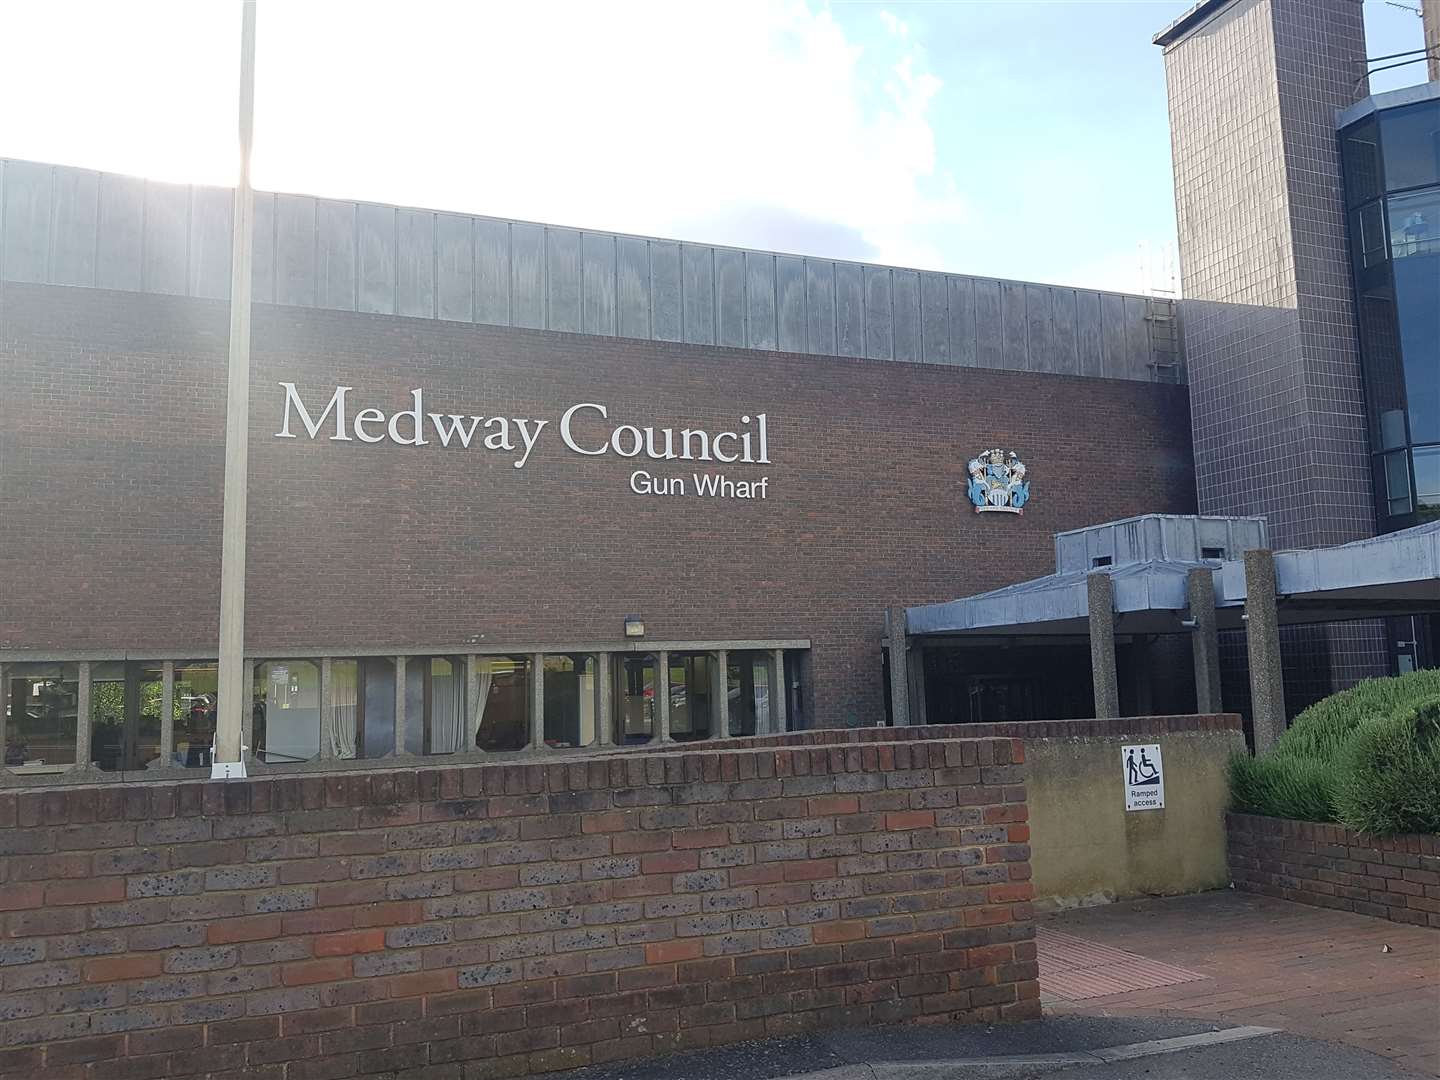 Ten senior officers earned above £150,000 at Medway Council